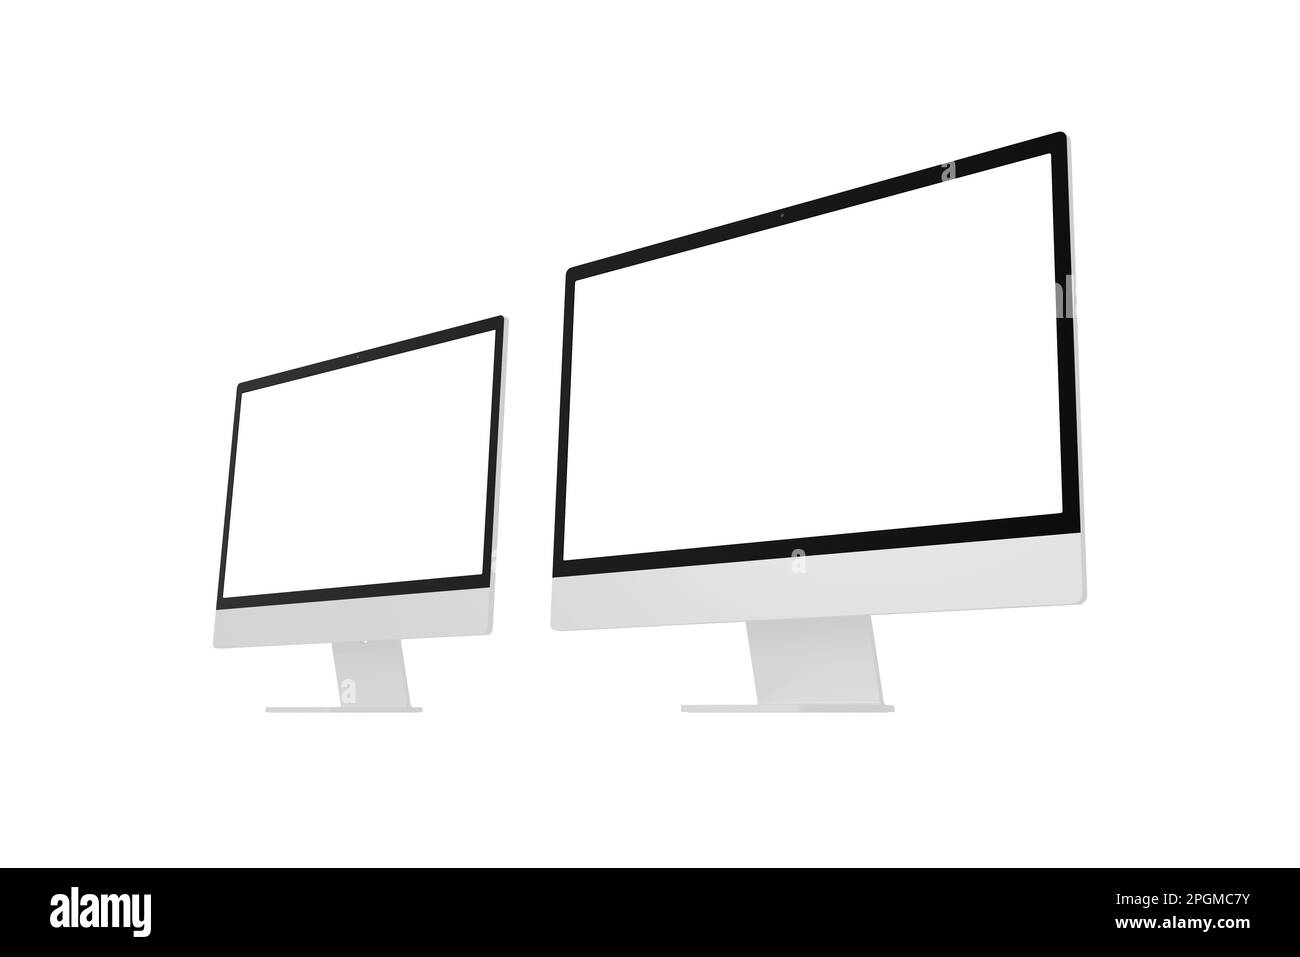 Two modern computer displays with isolated screen for app or web page promotions Stock Photo